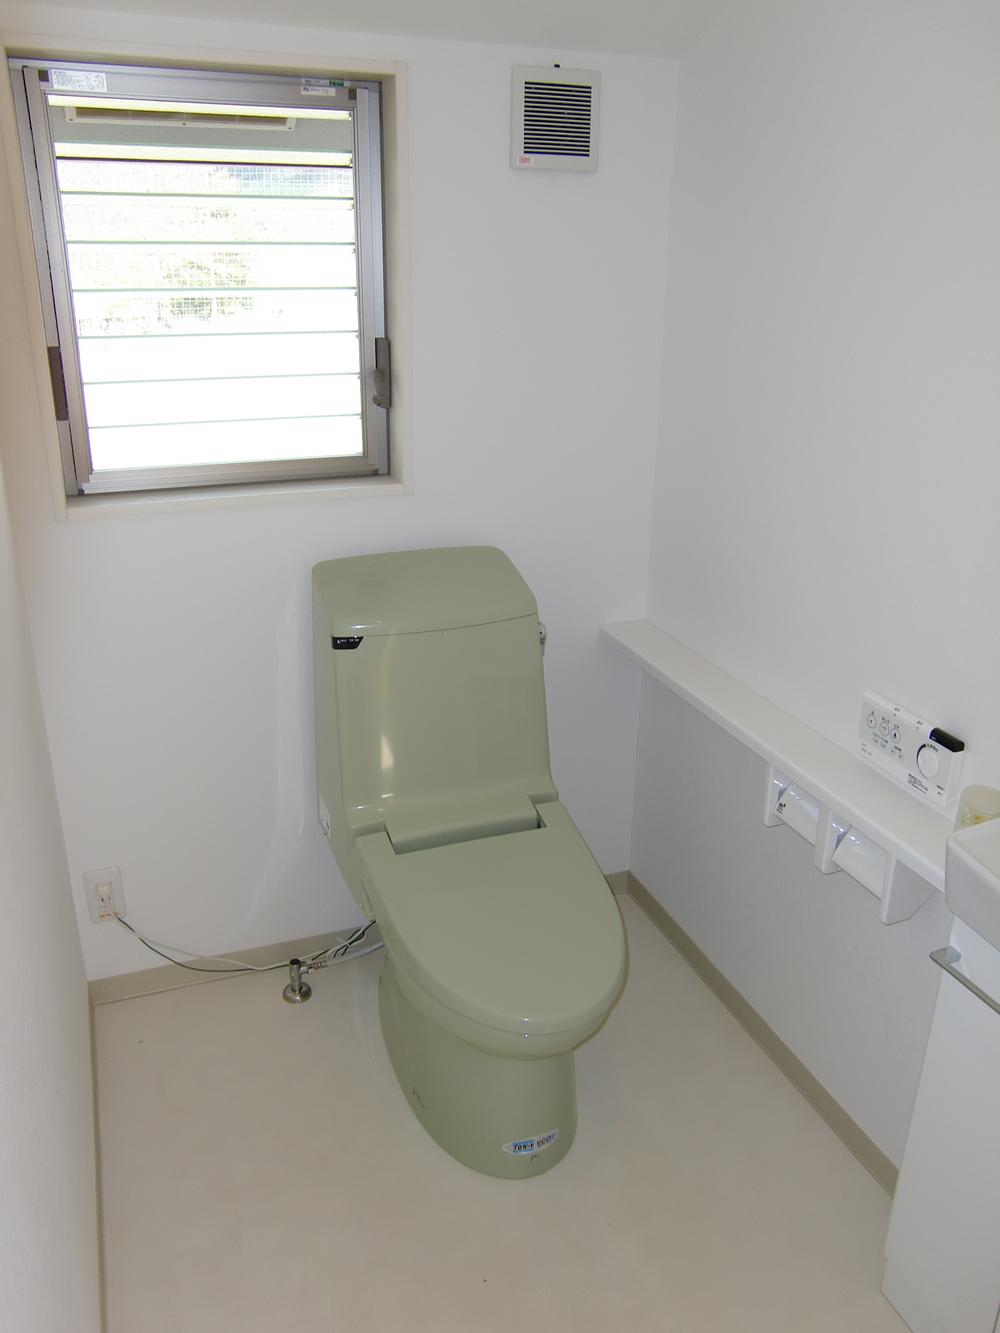 Toilet. It is the first floor of the toilet. Ventilation is good for toilet window also make the spread is facing on the north side of the ground